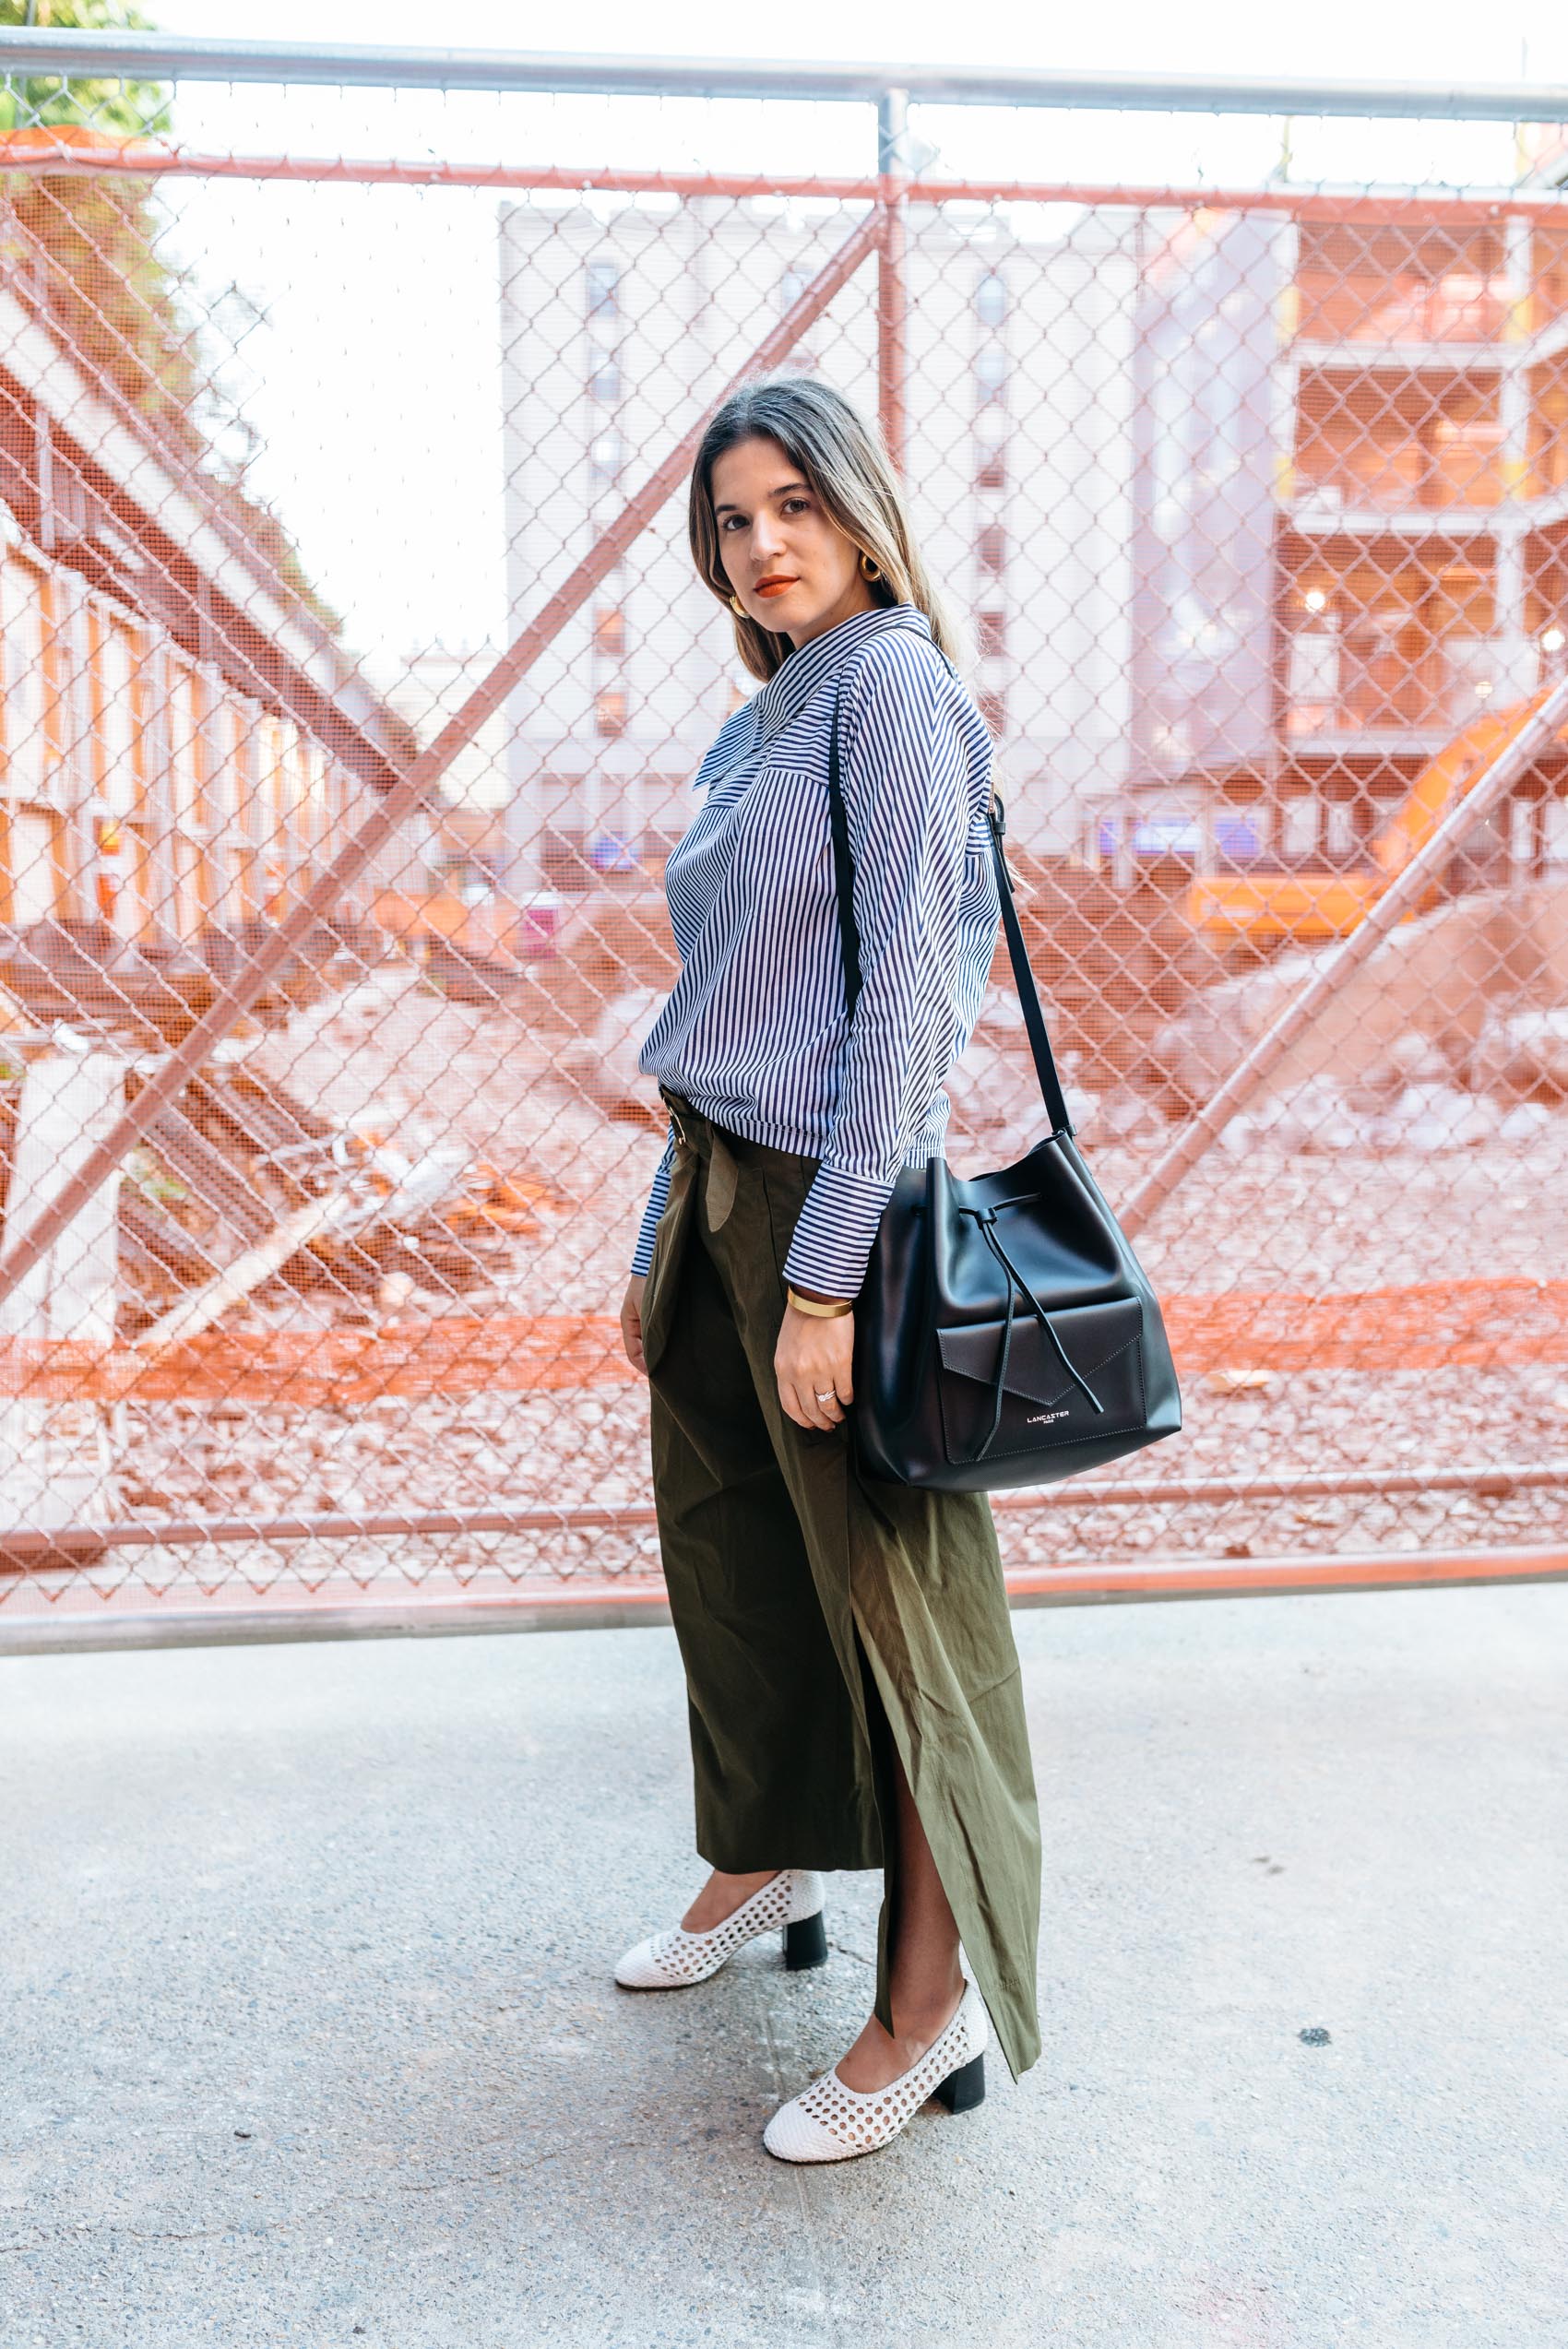 Maristella wearing a casual chic outfit at NYFW with a Felix shirt, Zara pants, Sandro Paris shoes and Lancaster bag